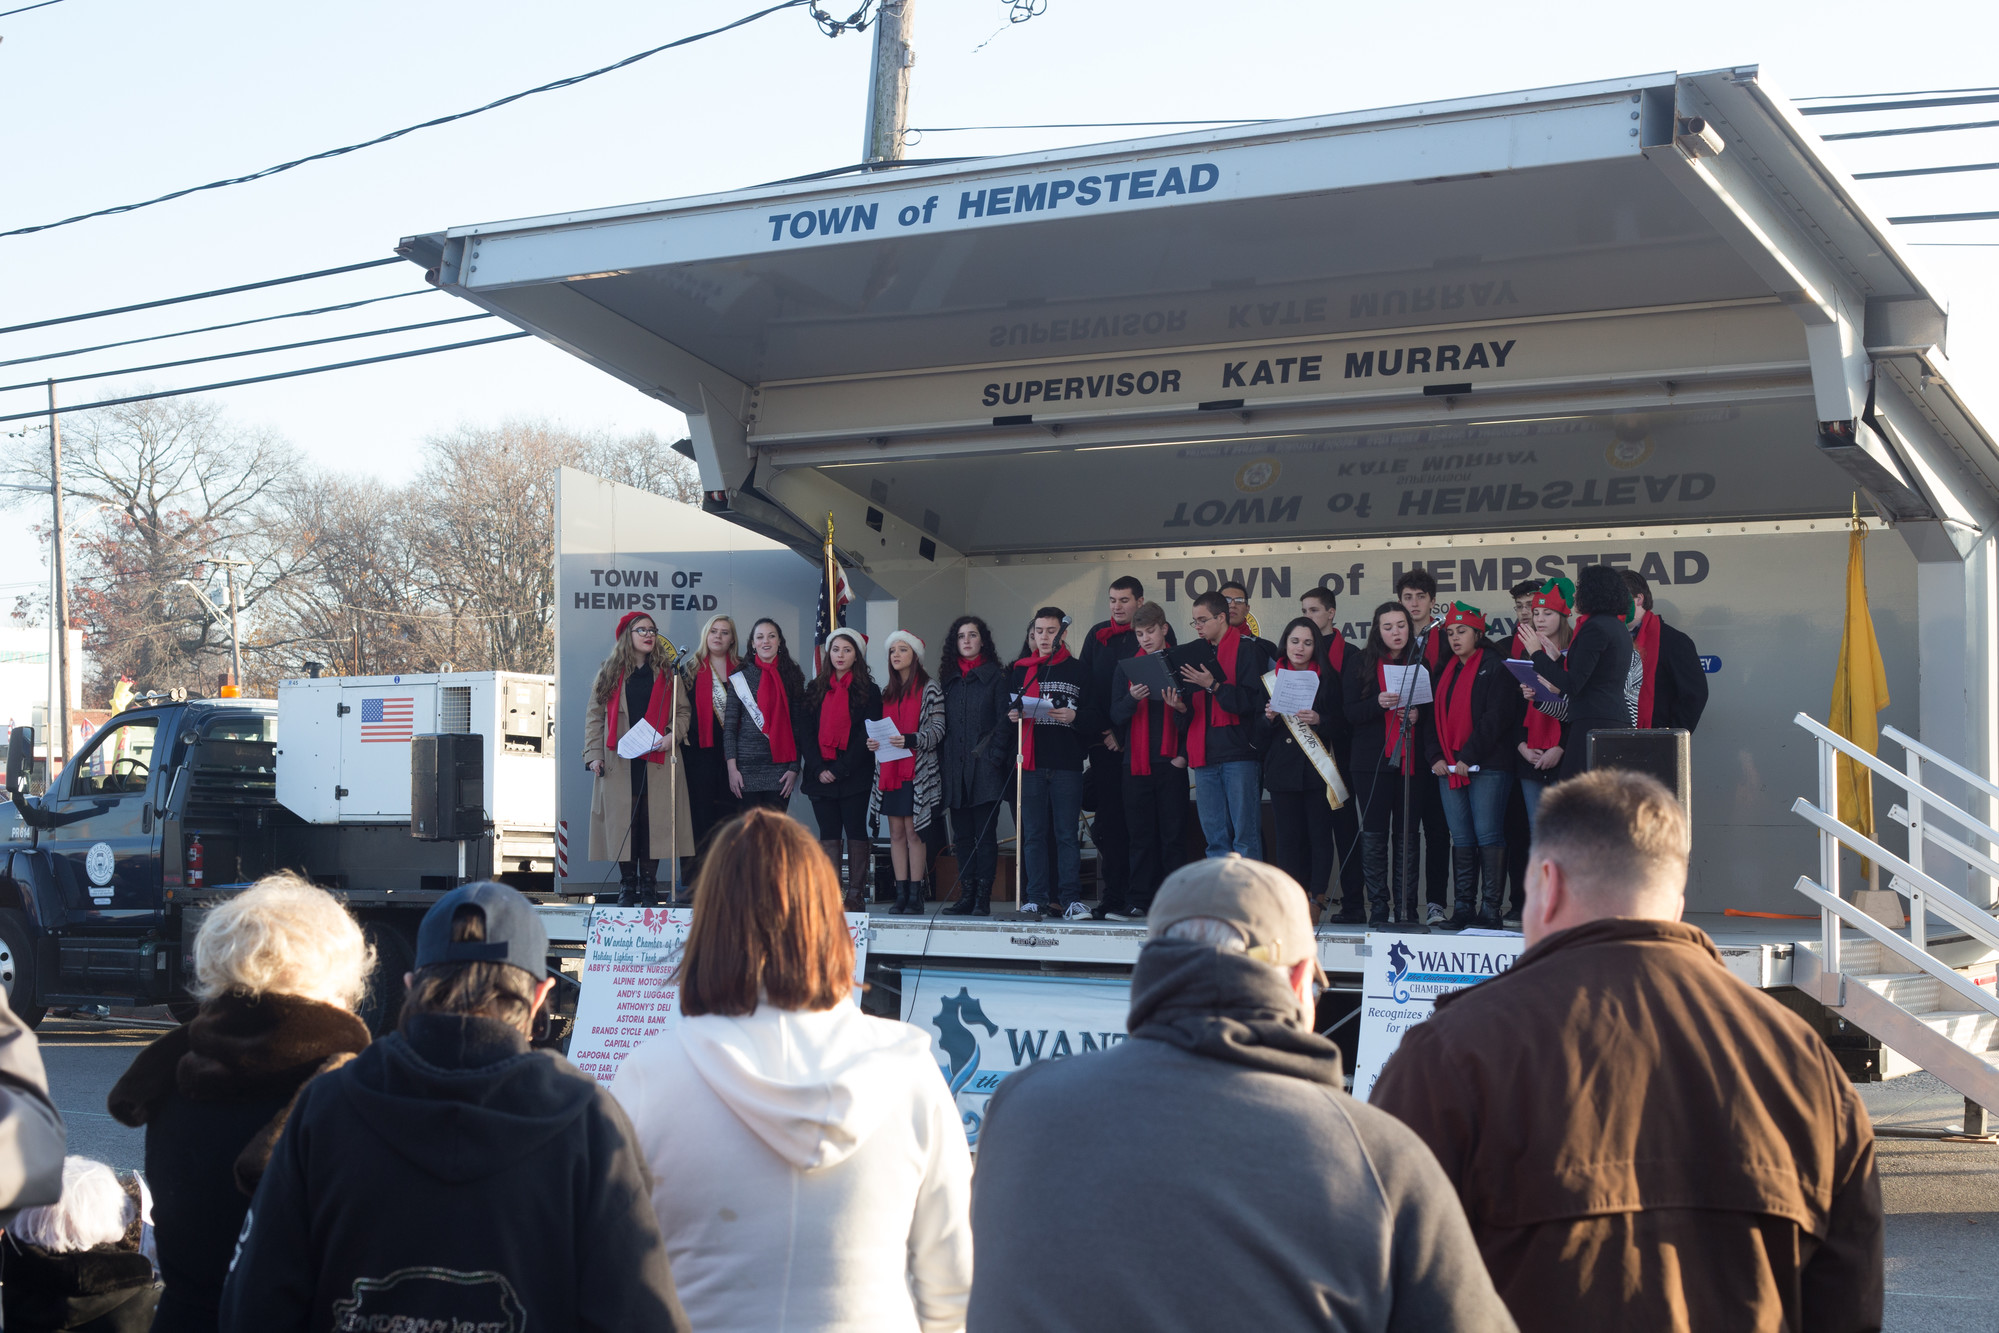 The Wantagh High School Jazz Ensemble performed at the Chamber of Commerce’s holiday lighting ceremony last Sunday afternoon at Triangle Park.